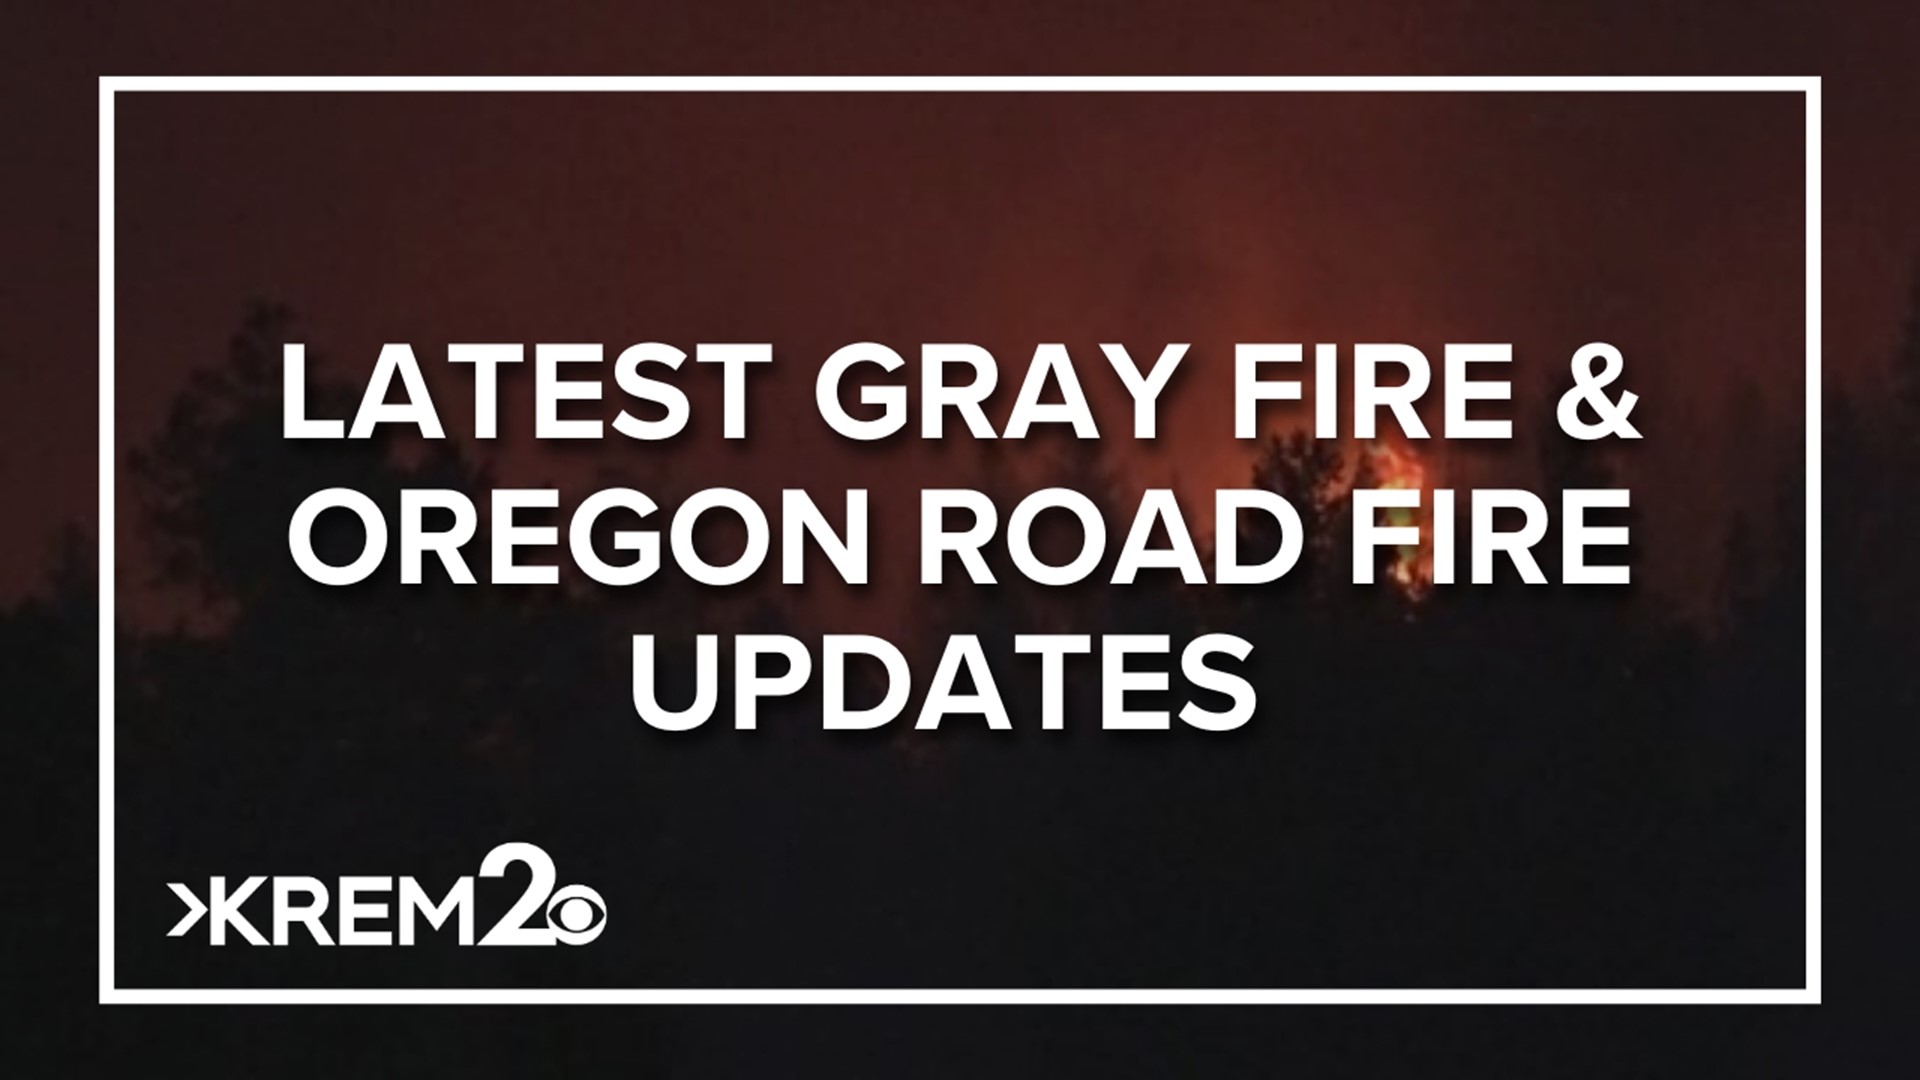 The two destructive wildfires burning in Spokane County have destroyed hundreds of structures, burned tens of thousands of acres and claimed the lives of two people